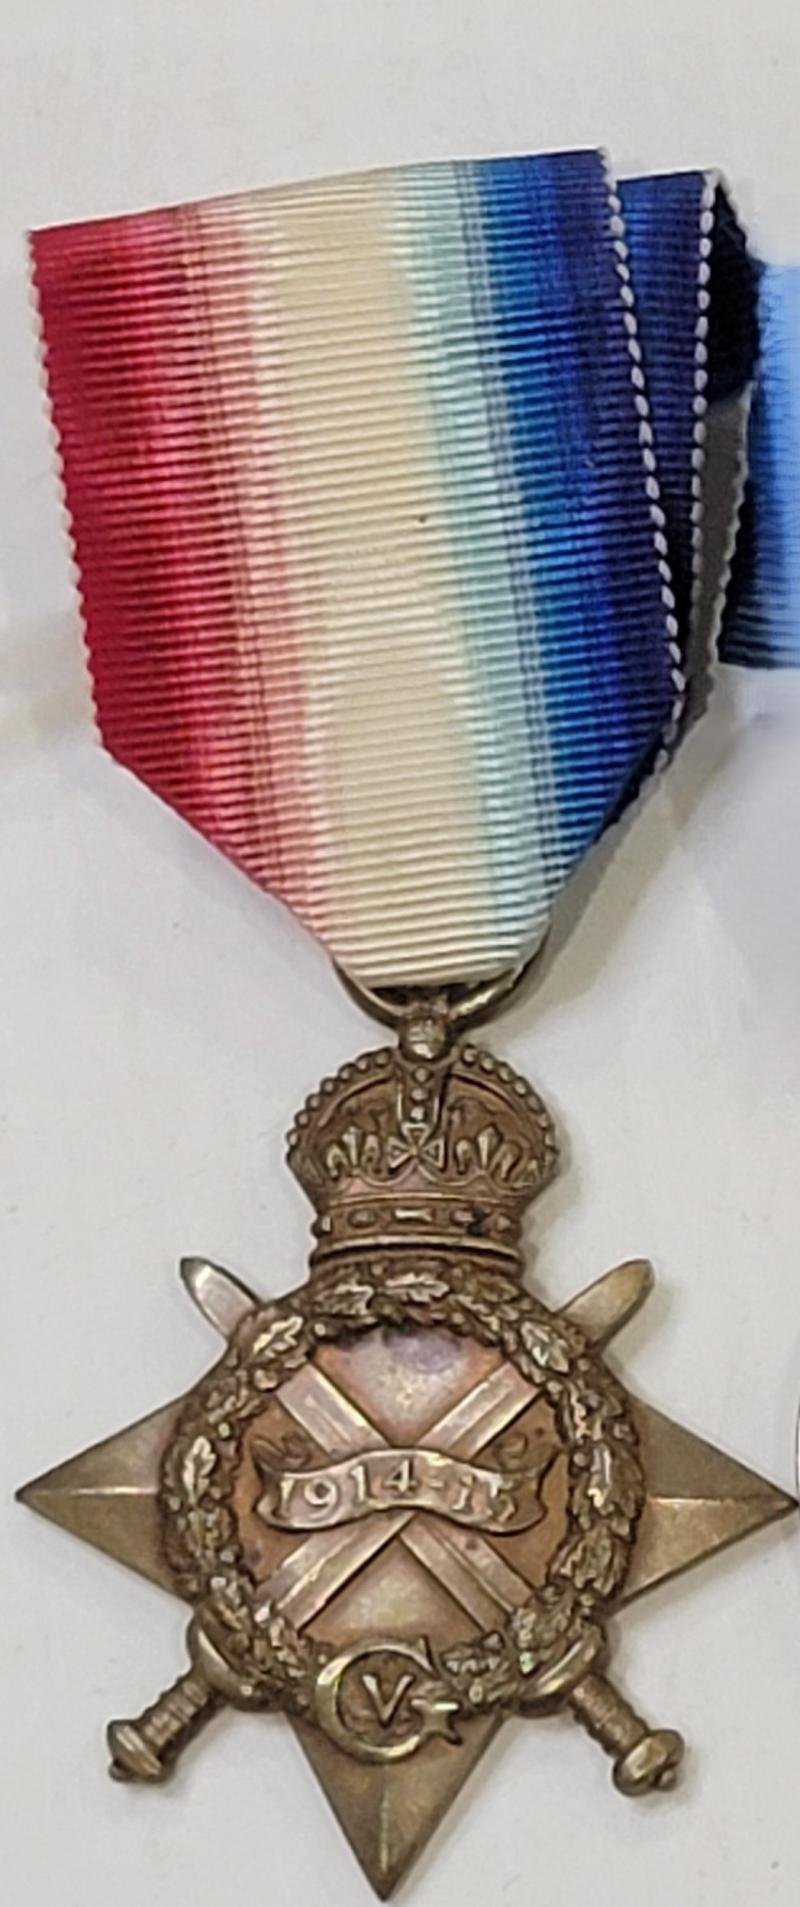 1914 - 15 Star to 107163 Pte William D Crooks 2nd CMR